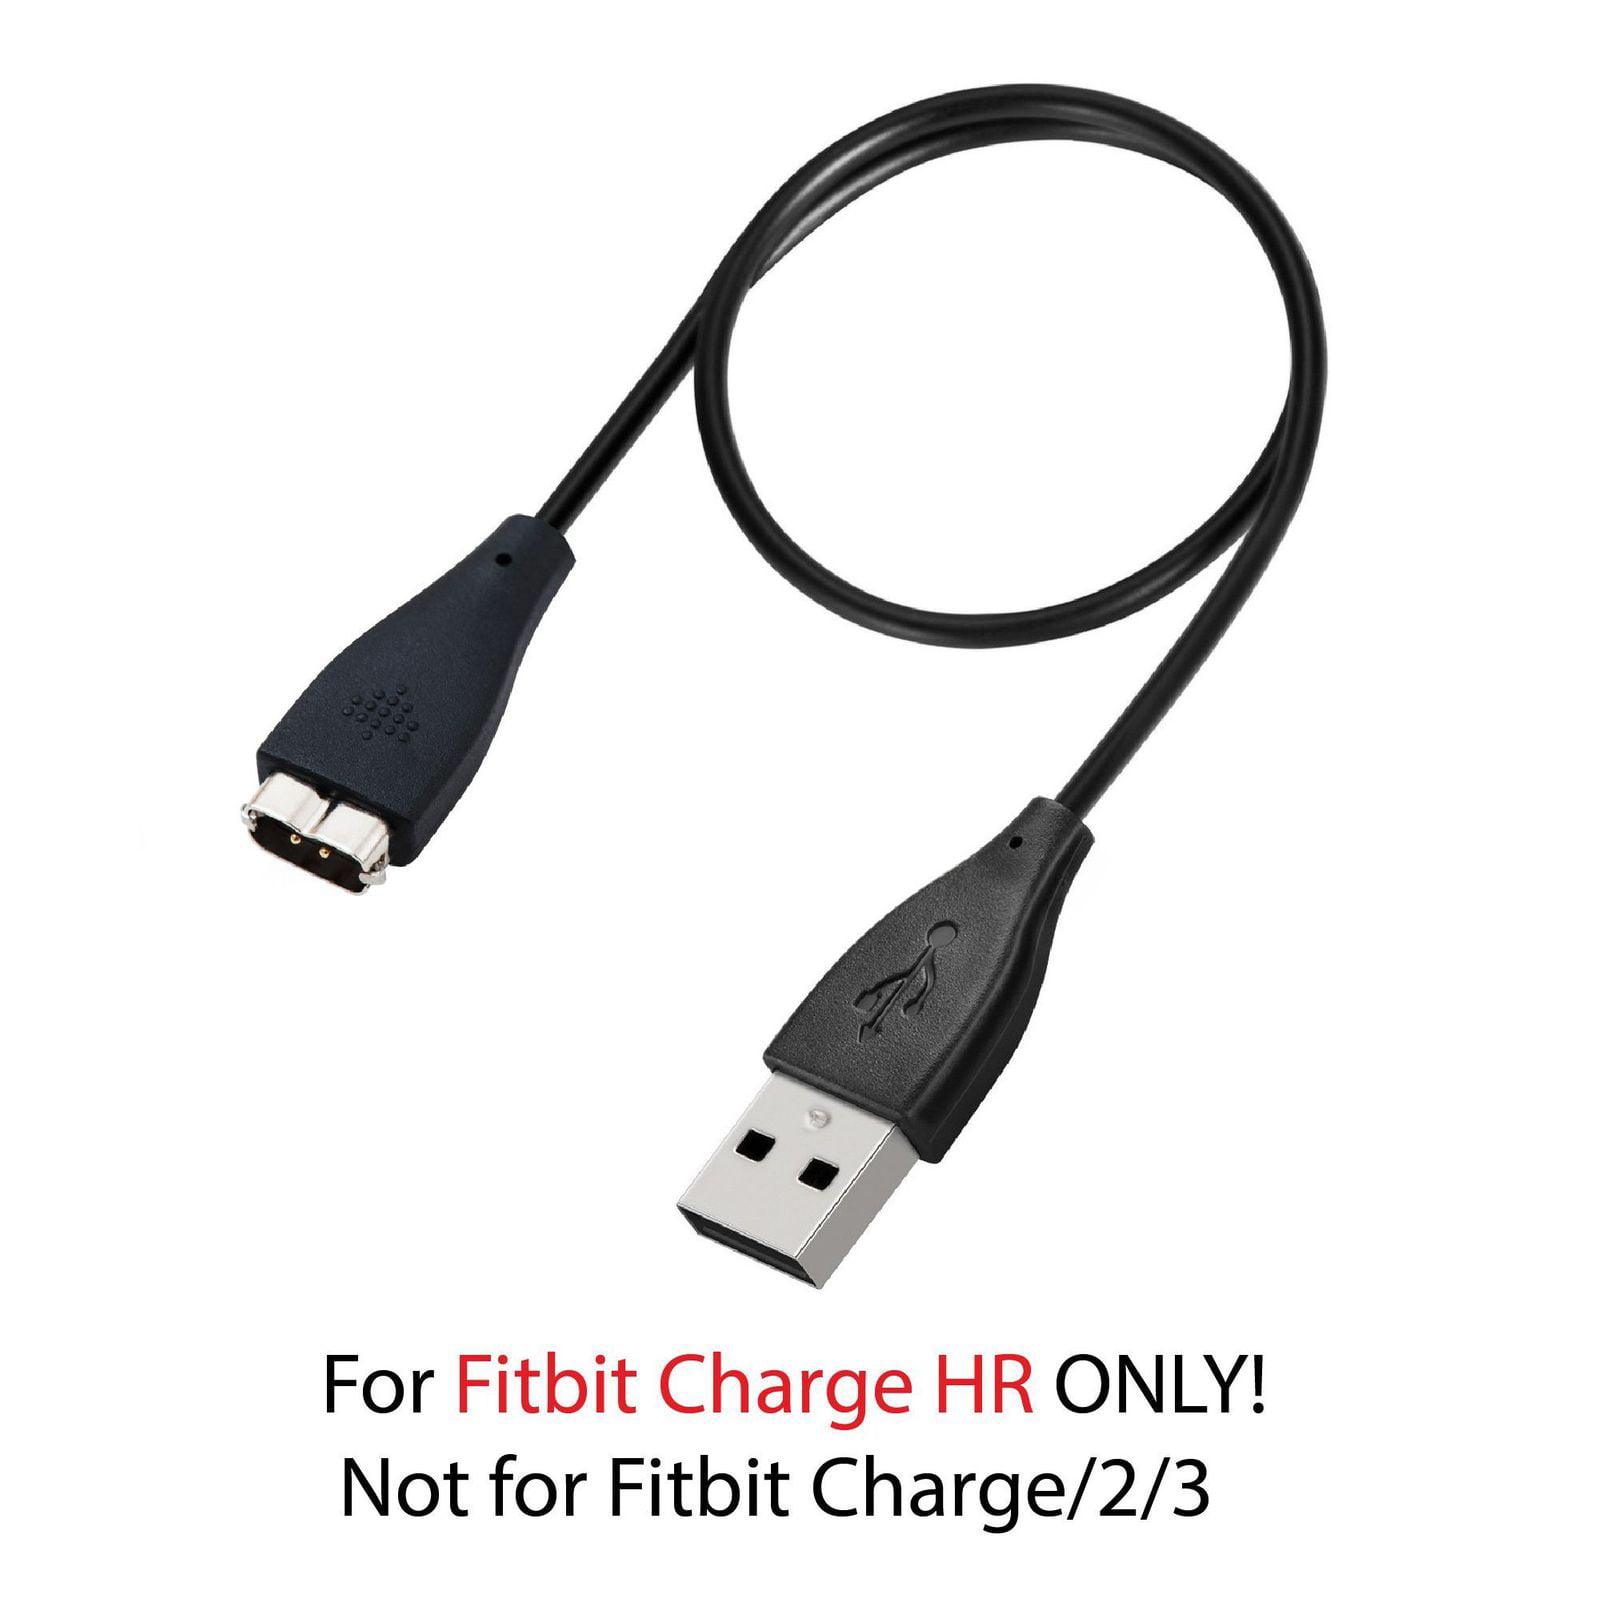 New USB Power Charger Cable Lead For Activity FitBit Charge Bracelet HR 